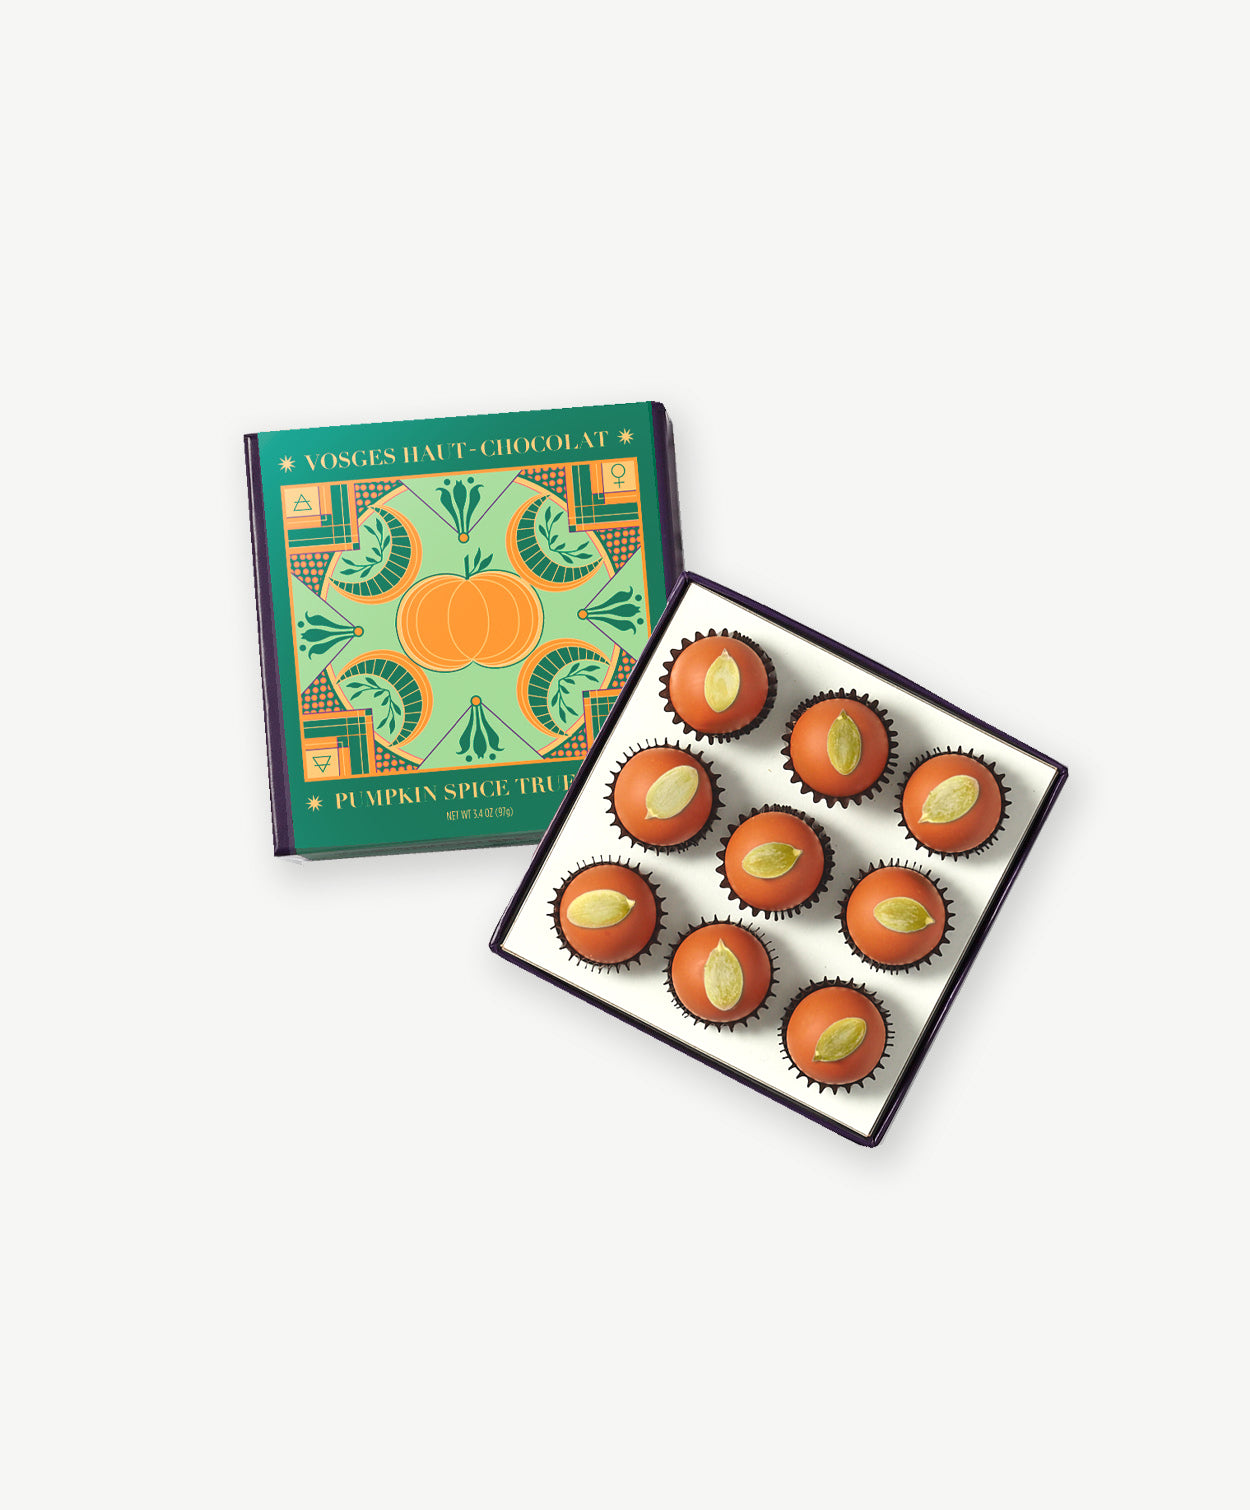 A green and gold chocolate box sits open revealing 9 bright orange pumpkin spice truffles adorned with toasted pumpkin seeds on a light grey backround.